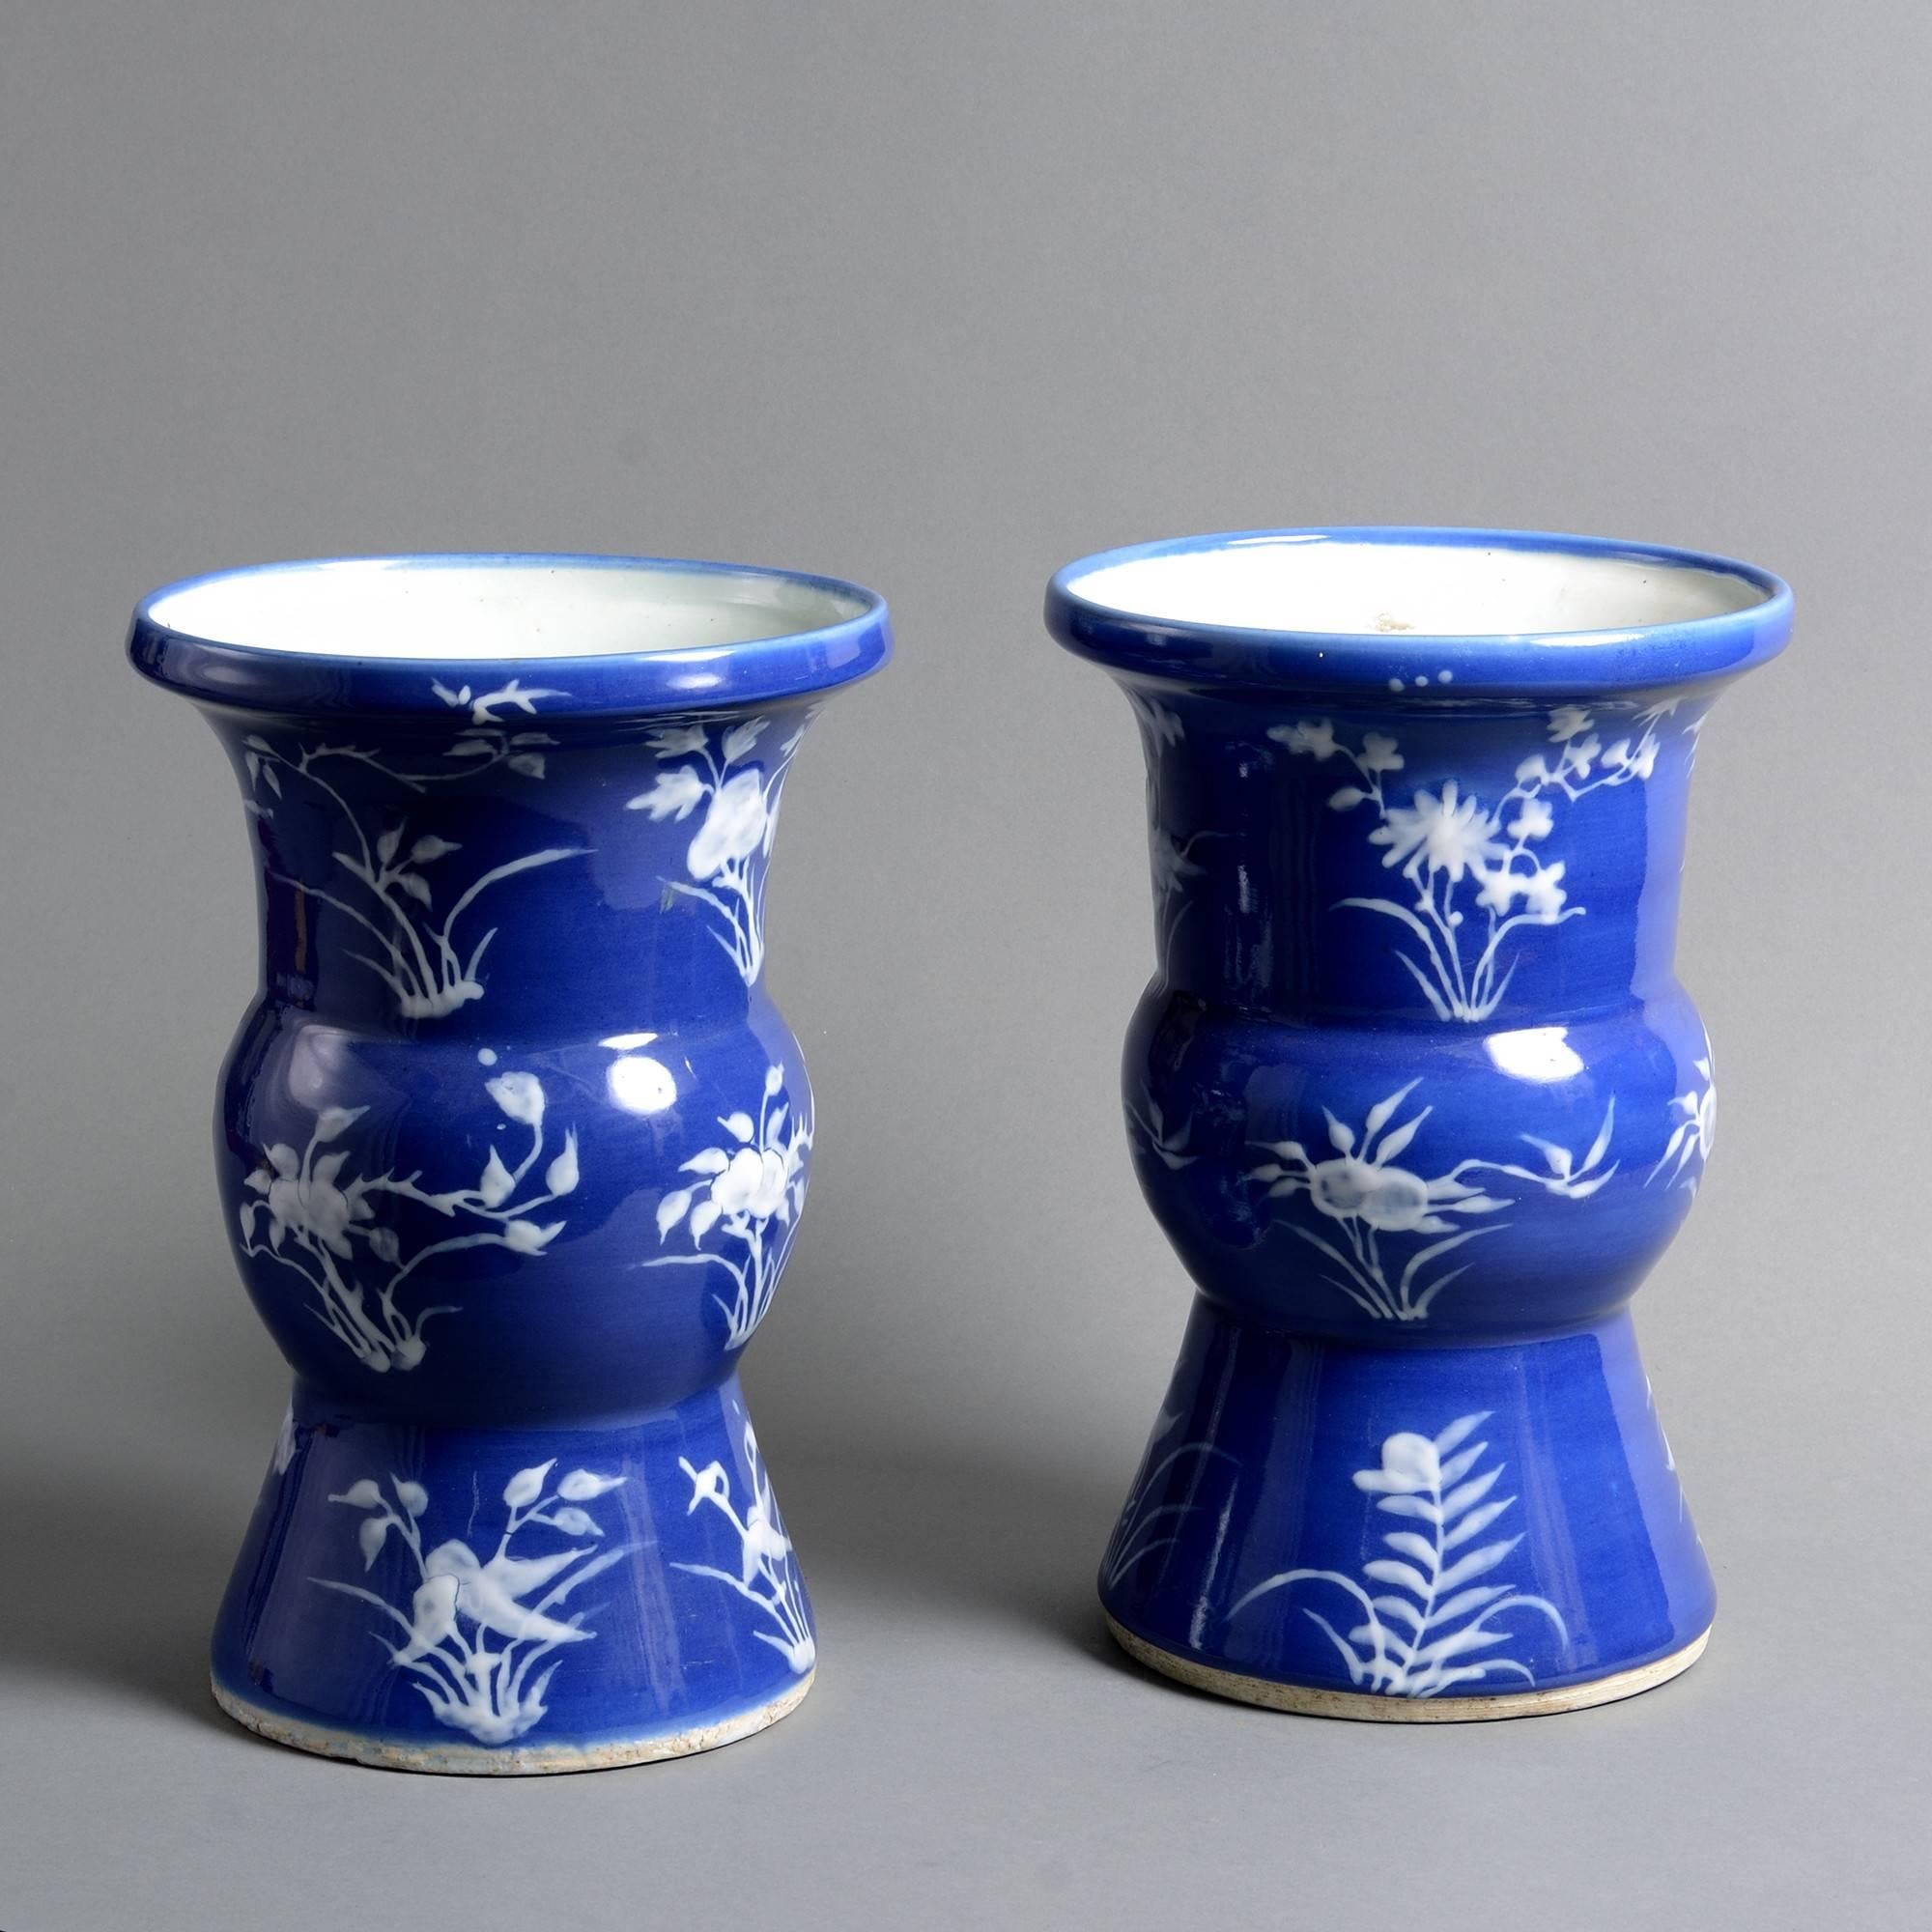 A 19th century pair of porcelain beaker vases, the bodies decorated with white stylized flowers upon a rich blue ground. 

Qing dynasty, Tongzhi period.